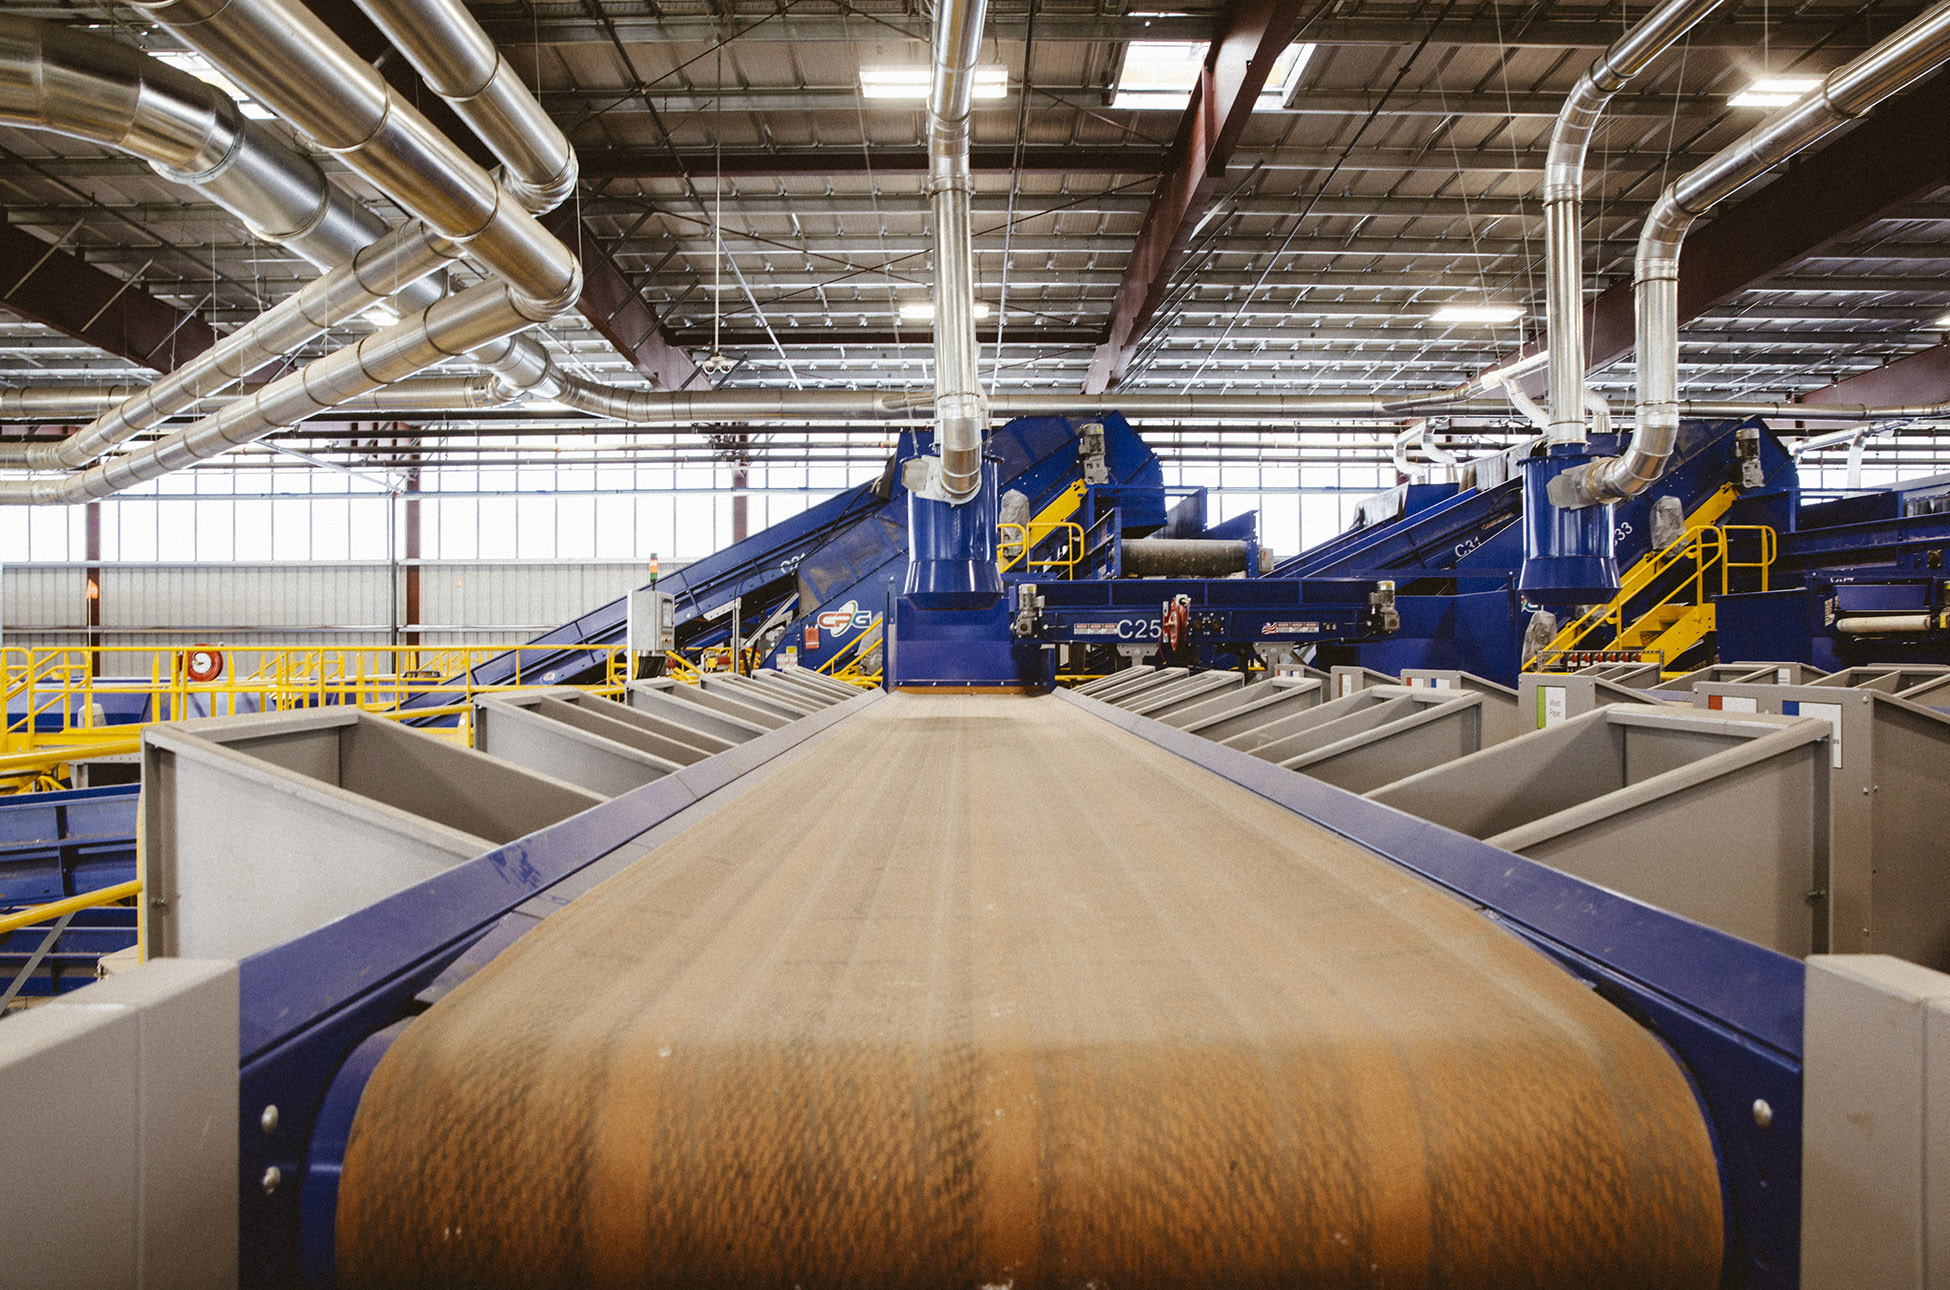 Republic Services collects and processes more than 5 million tons of recyclables a year.